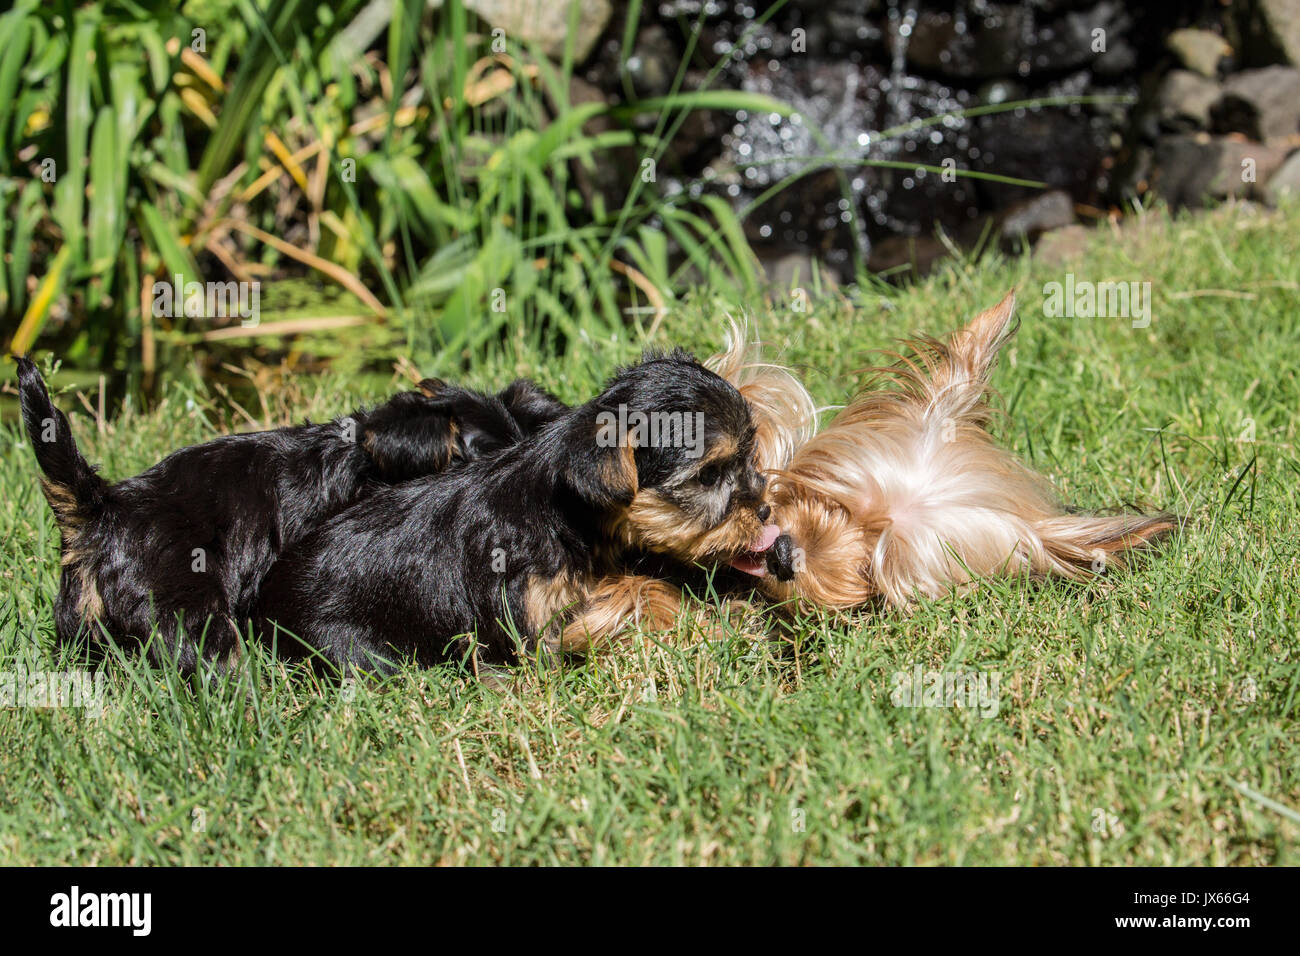 Three Teacup Yorkshire Terrier puppies, two nursing and one kissing its mother on a lawn in Issaquah, Washington, USA Stock Photo